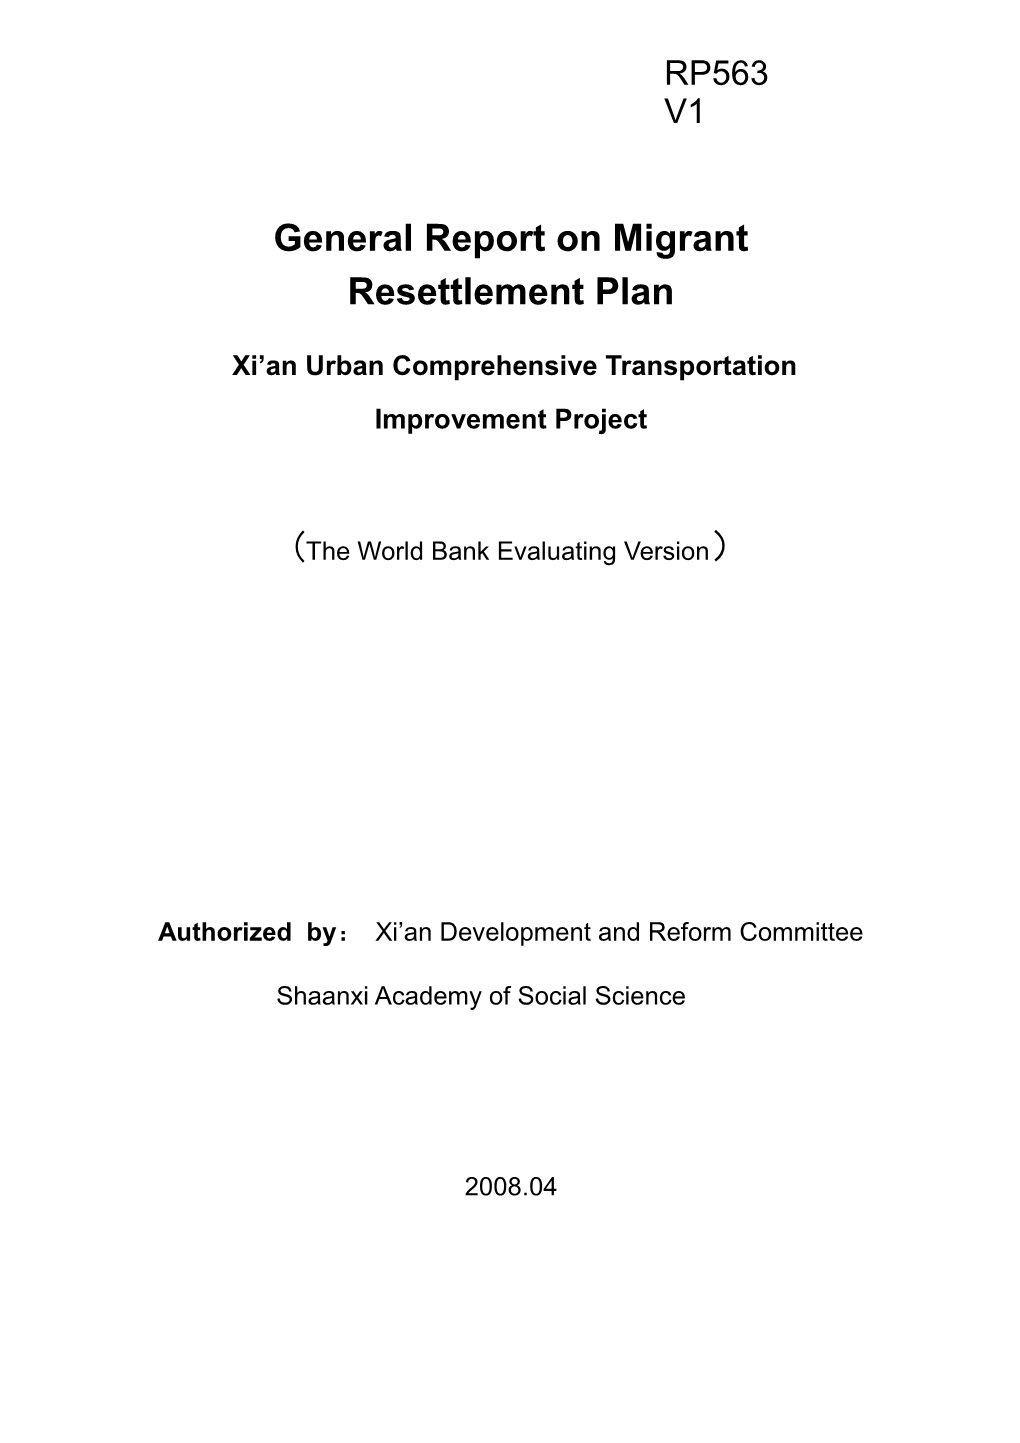 General Report on Migrant Resettlement Plan